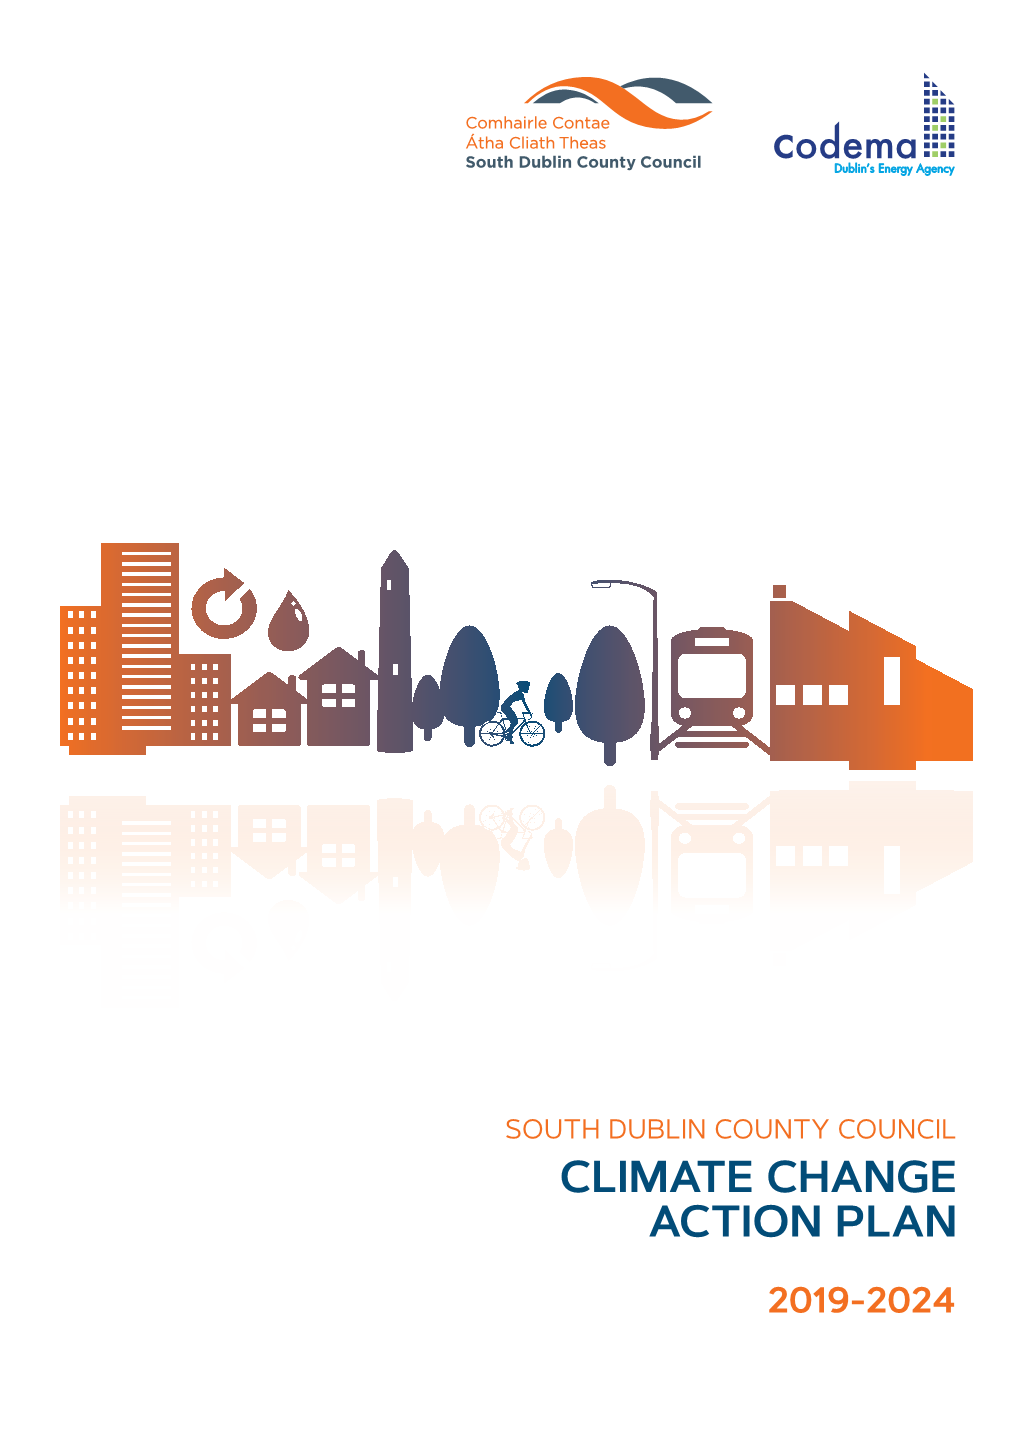 South Dublin County Council Climate Change Action Plan